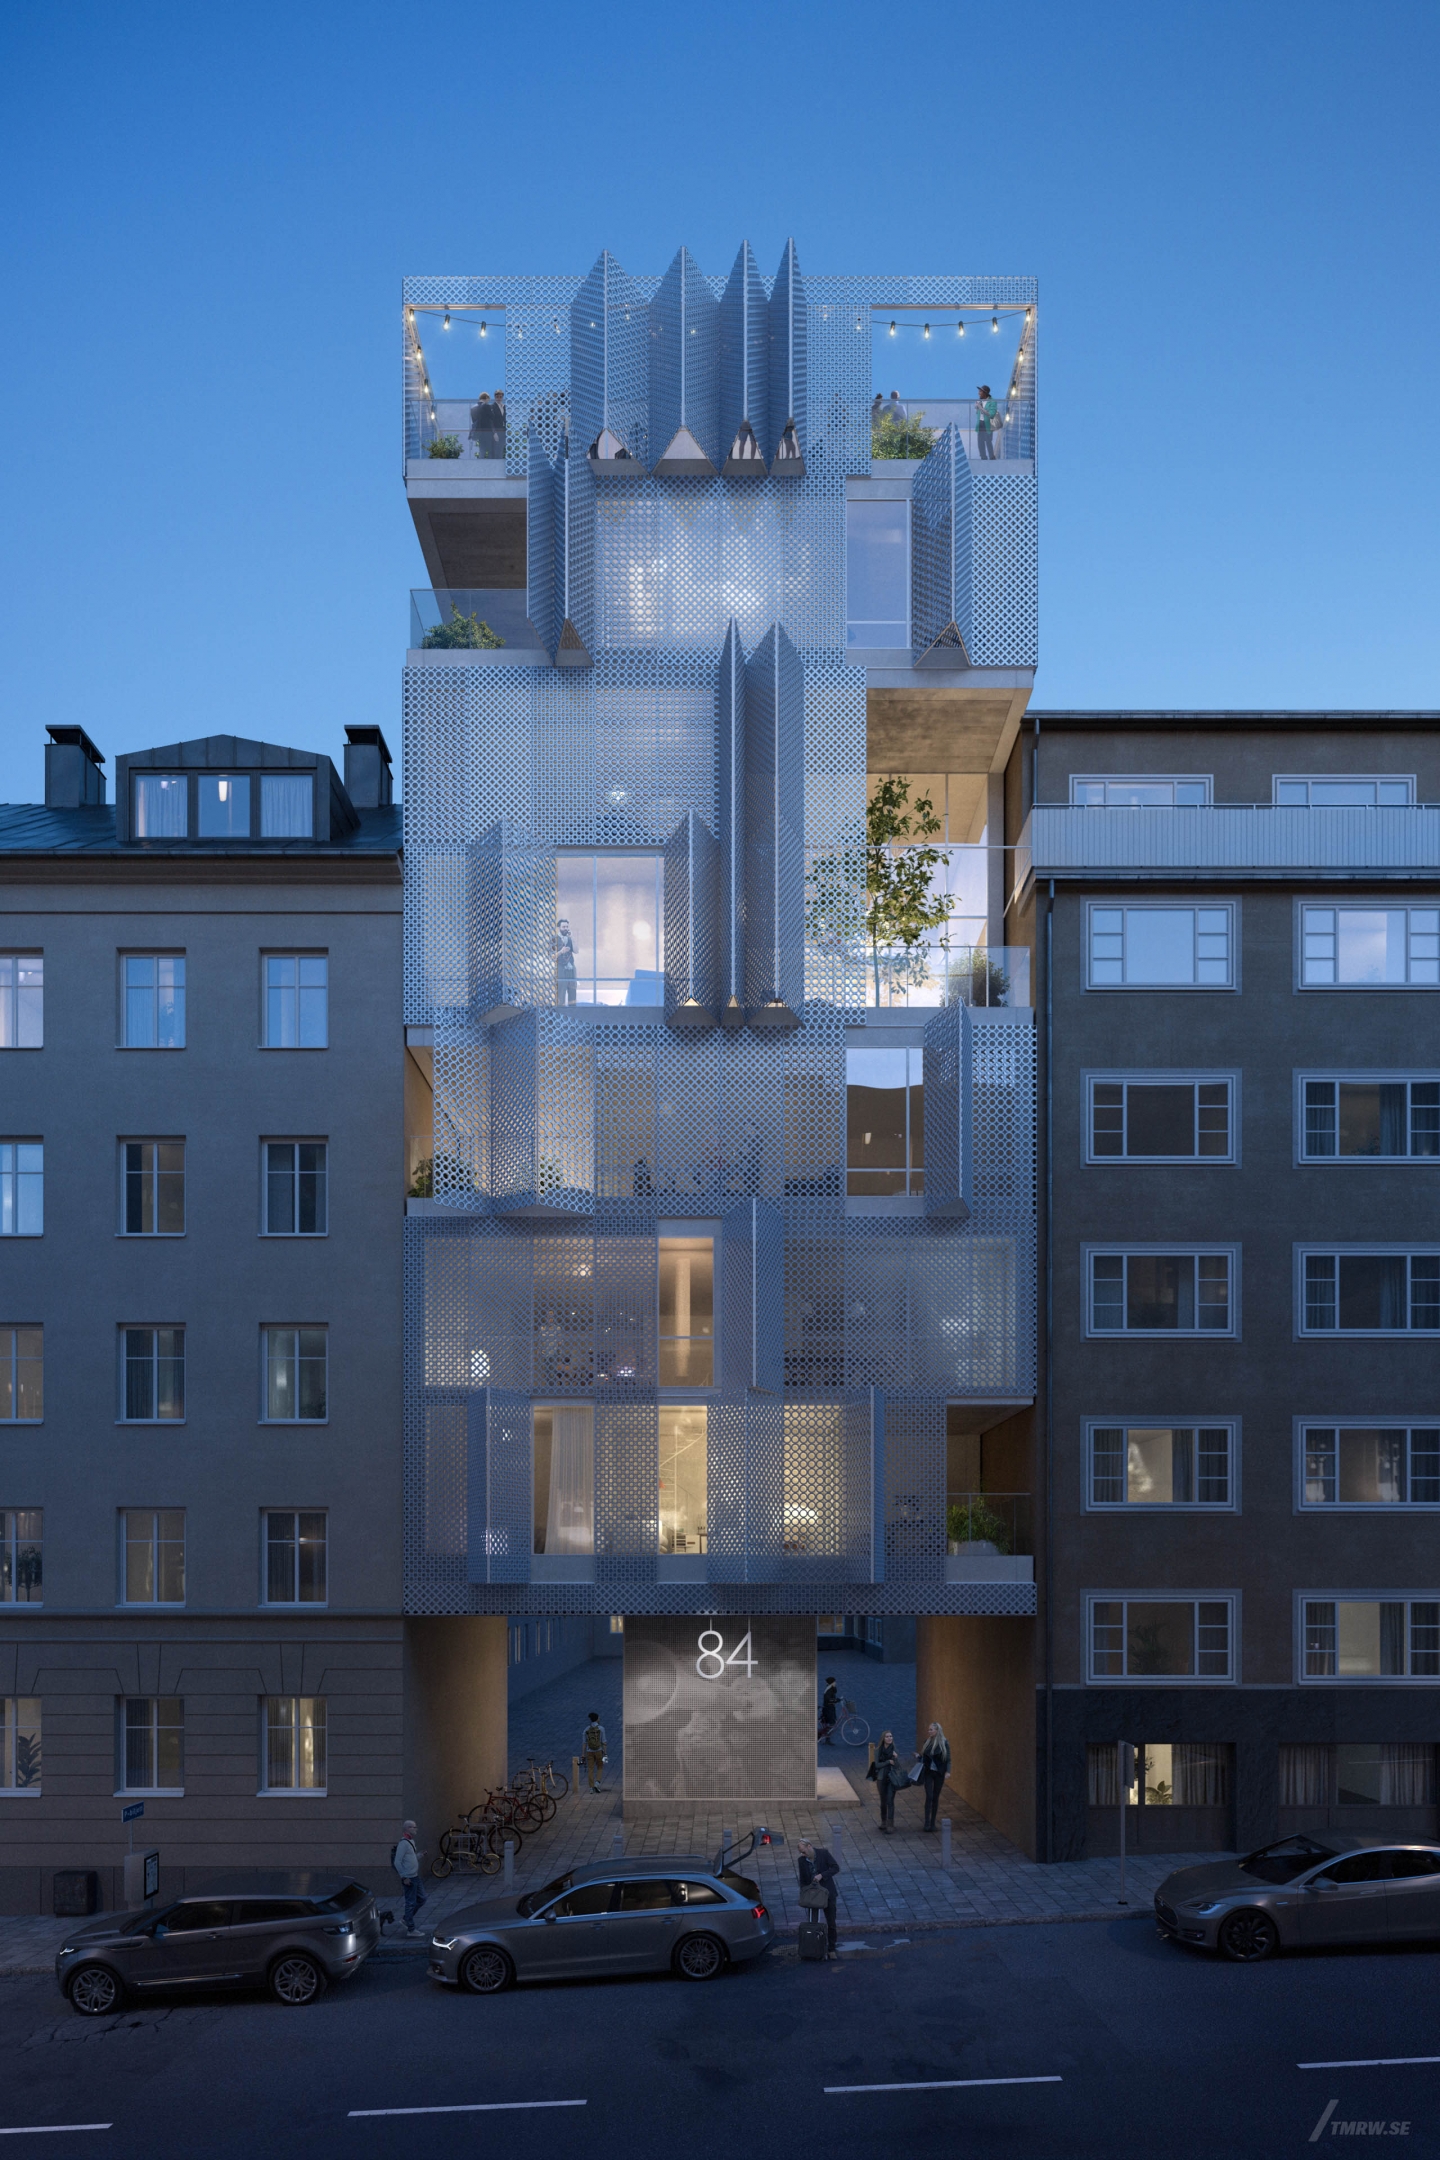 Architectural visualization of Bondegatan for Identity, modern residential building in dusk